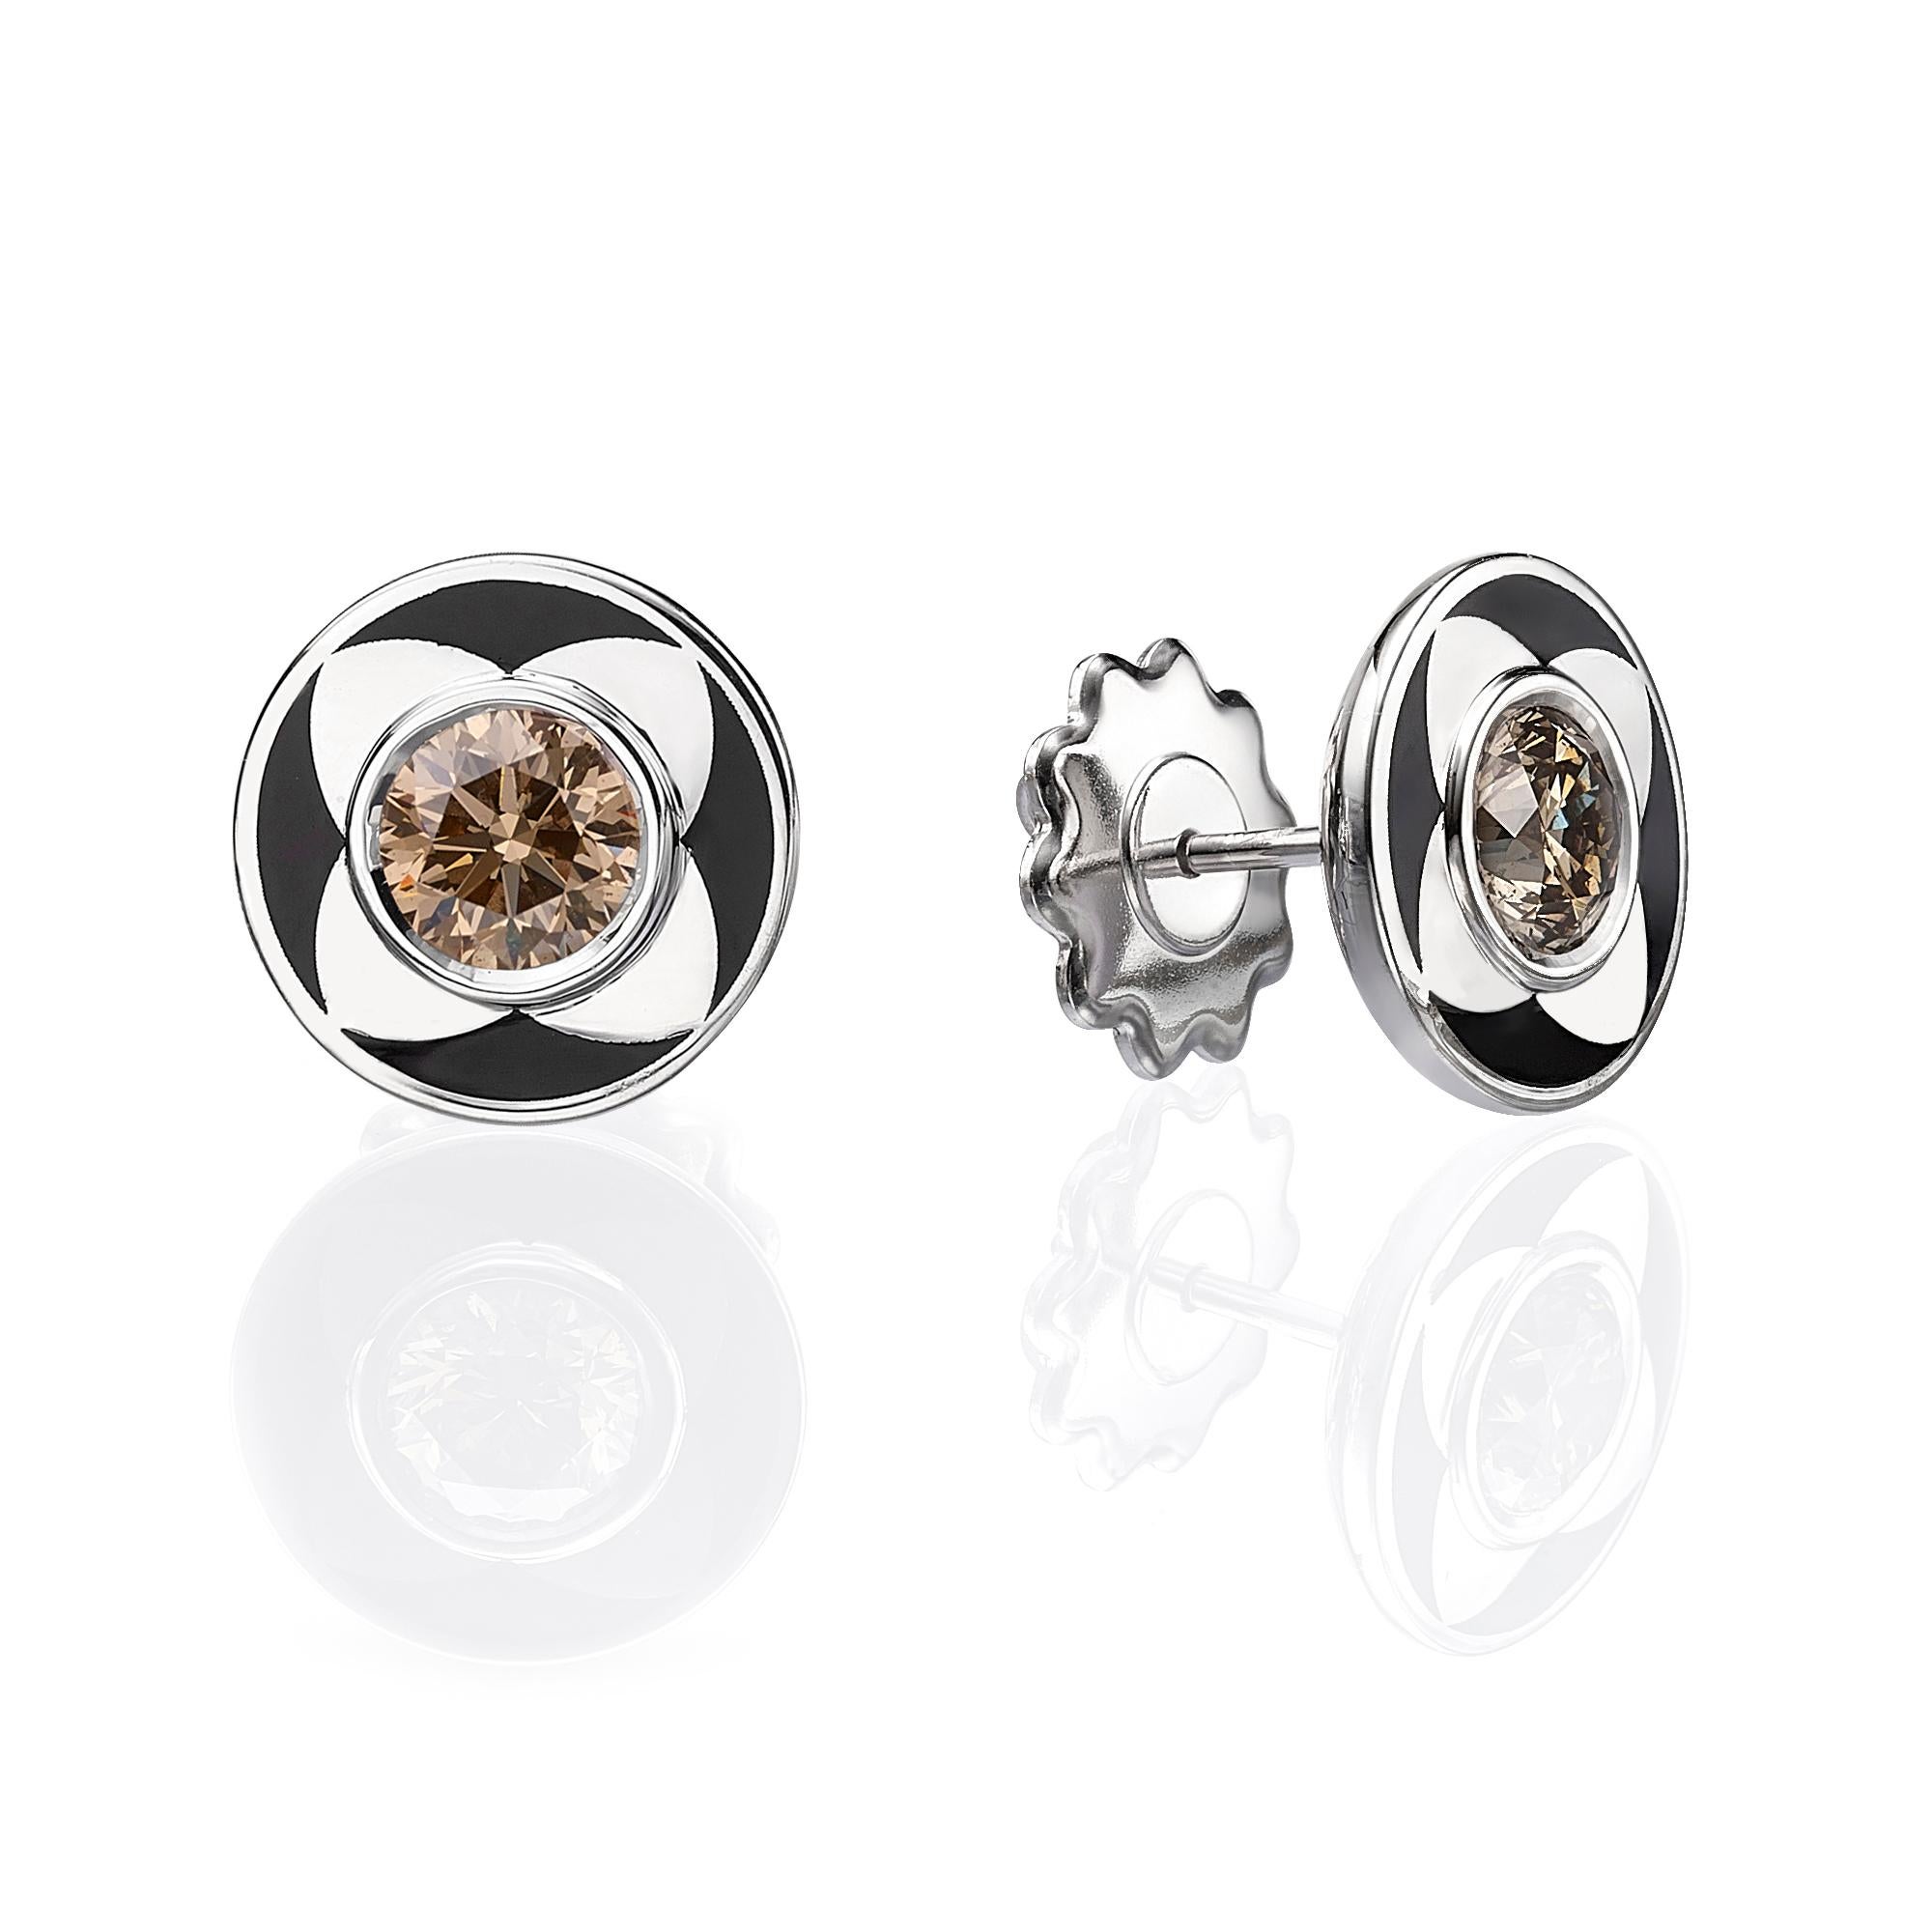 SKU# 4006122

Elegant stud earrings are made of 18k white gold and feature a unique design that combines the sparkle of diamonds with the boldness of black enamel. The enamel is skillfully applied to form a beautiful flower shape, creating a